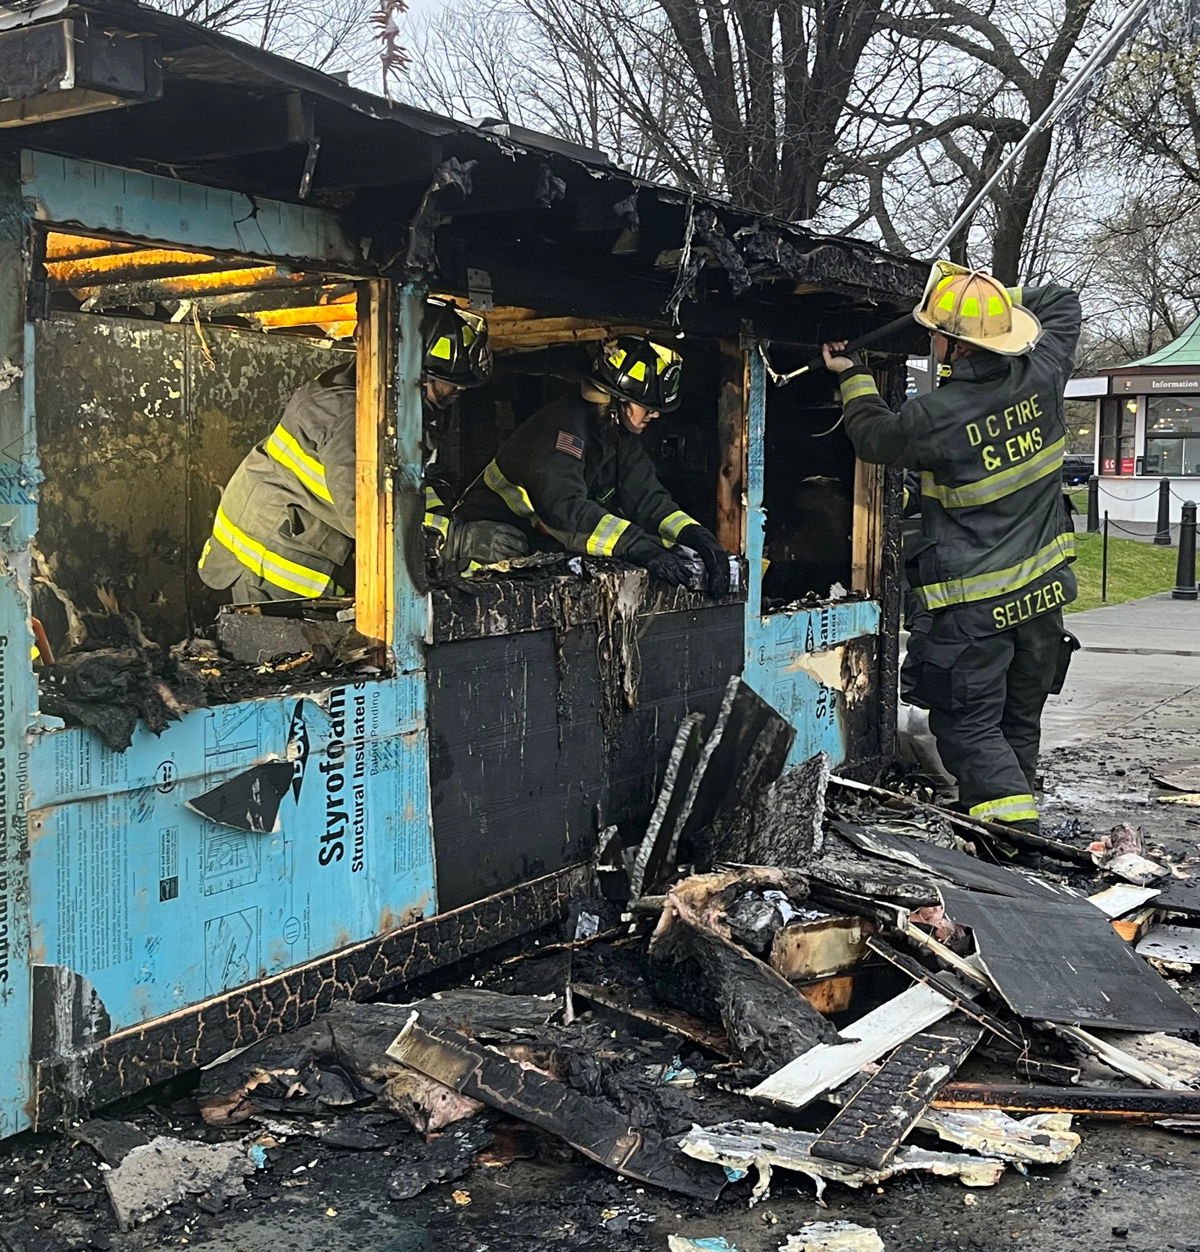 <i>From DC Fire and EMS via CNN Newsource</i><br/>This handout photo released by DC Fire and EMS shows officers working on a kiosk that was burned near the Lincoln Memorial in Washington